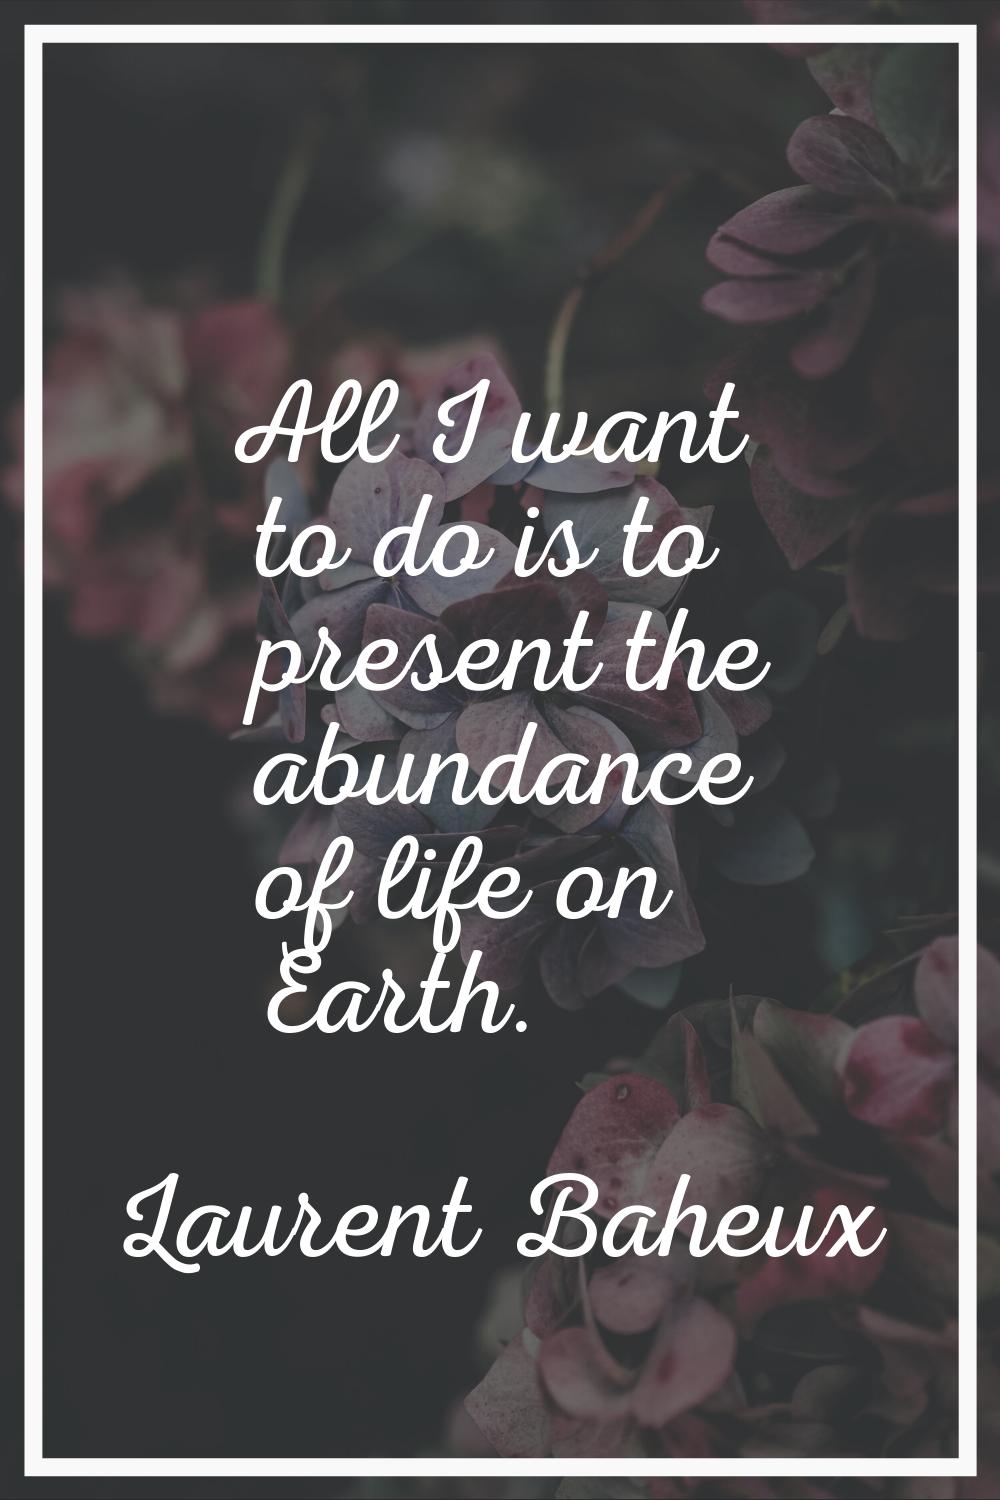 All I want to do is to present the abundance of life on Earth.